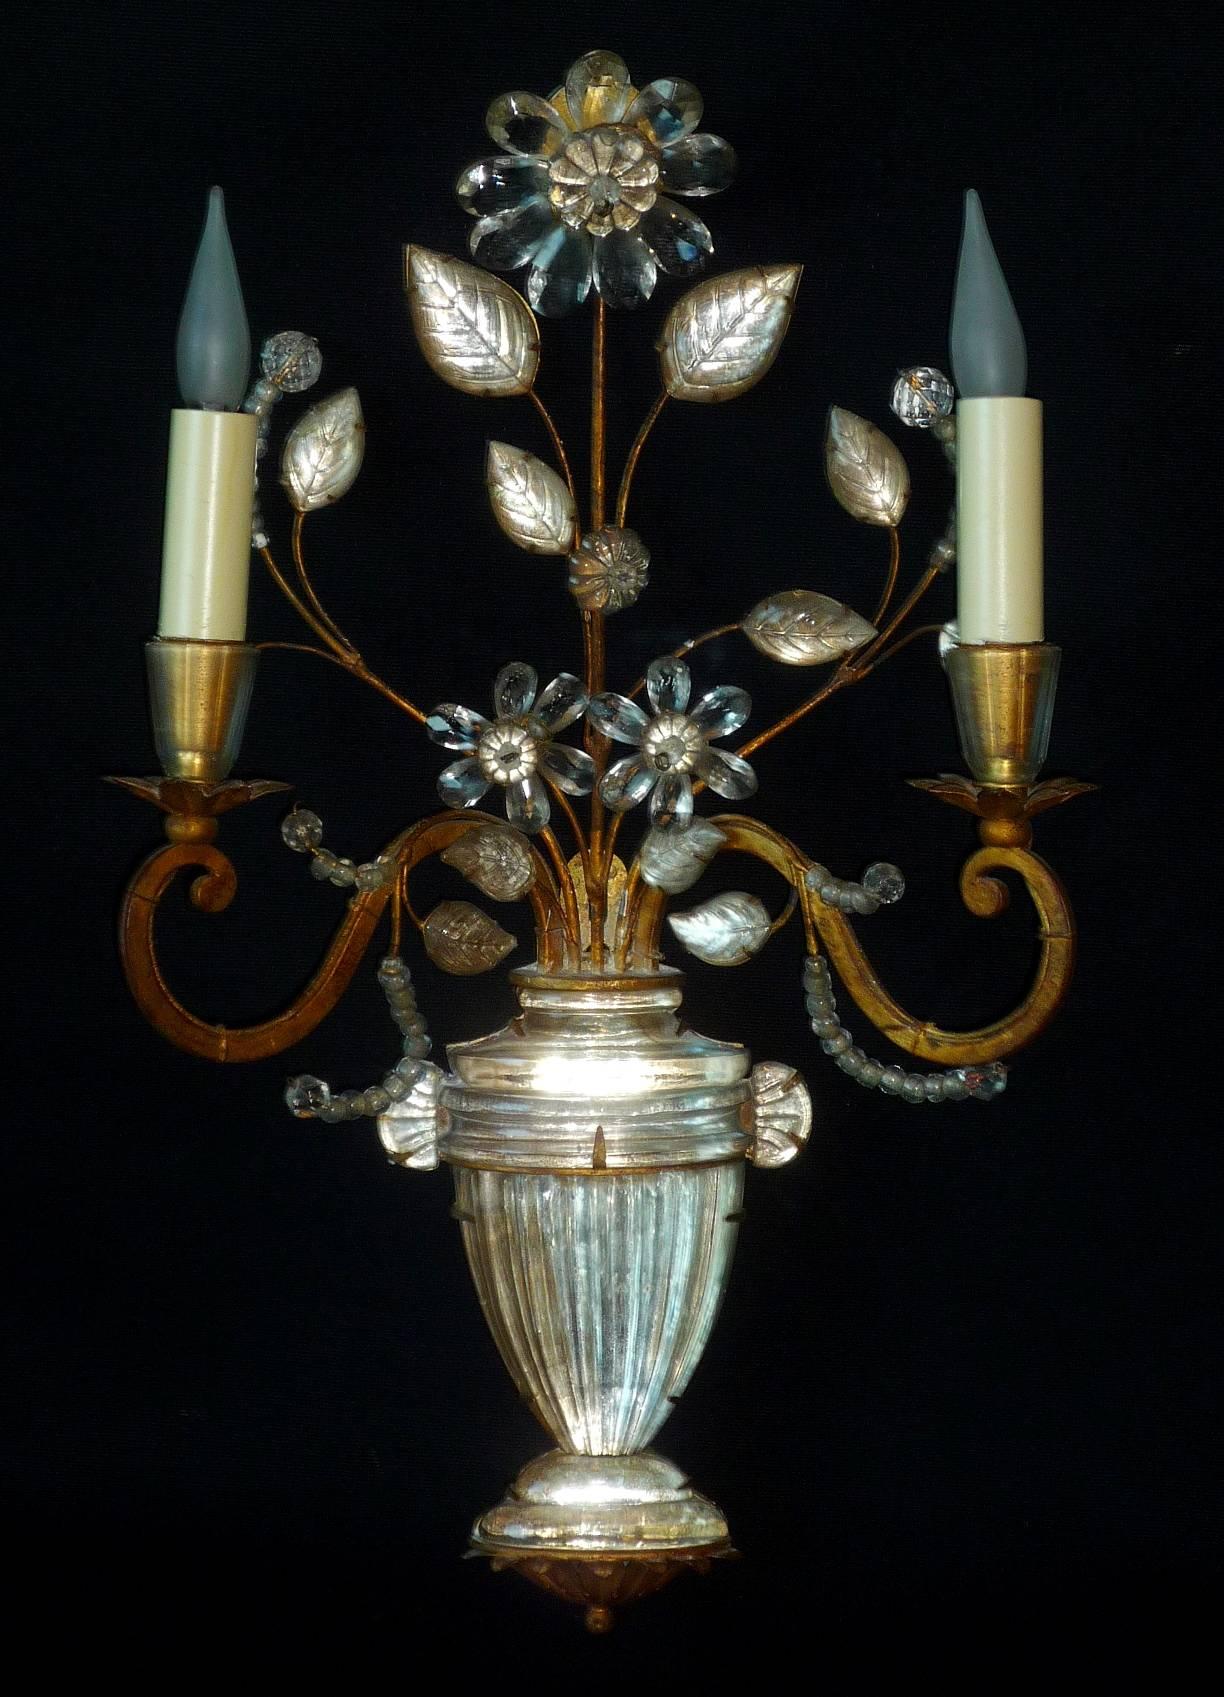 A pair of French Art Deco gilt iron and crystal wall lights (sconces) with neoclassical vases by Maison Baguès, Paris, circa 1925-1930.